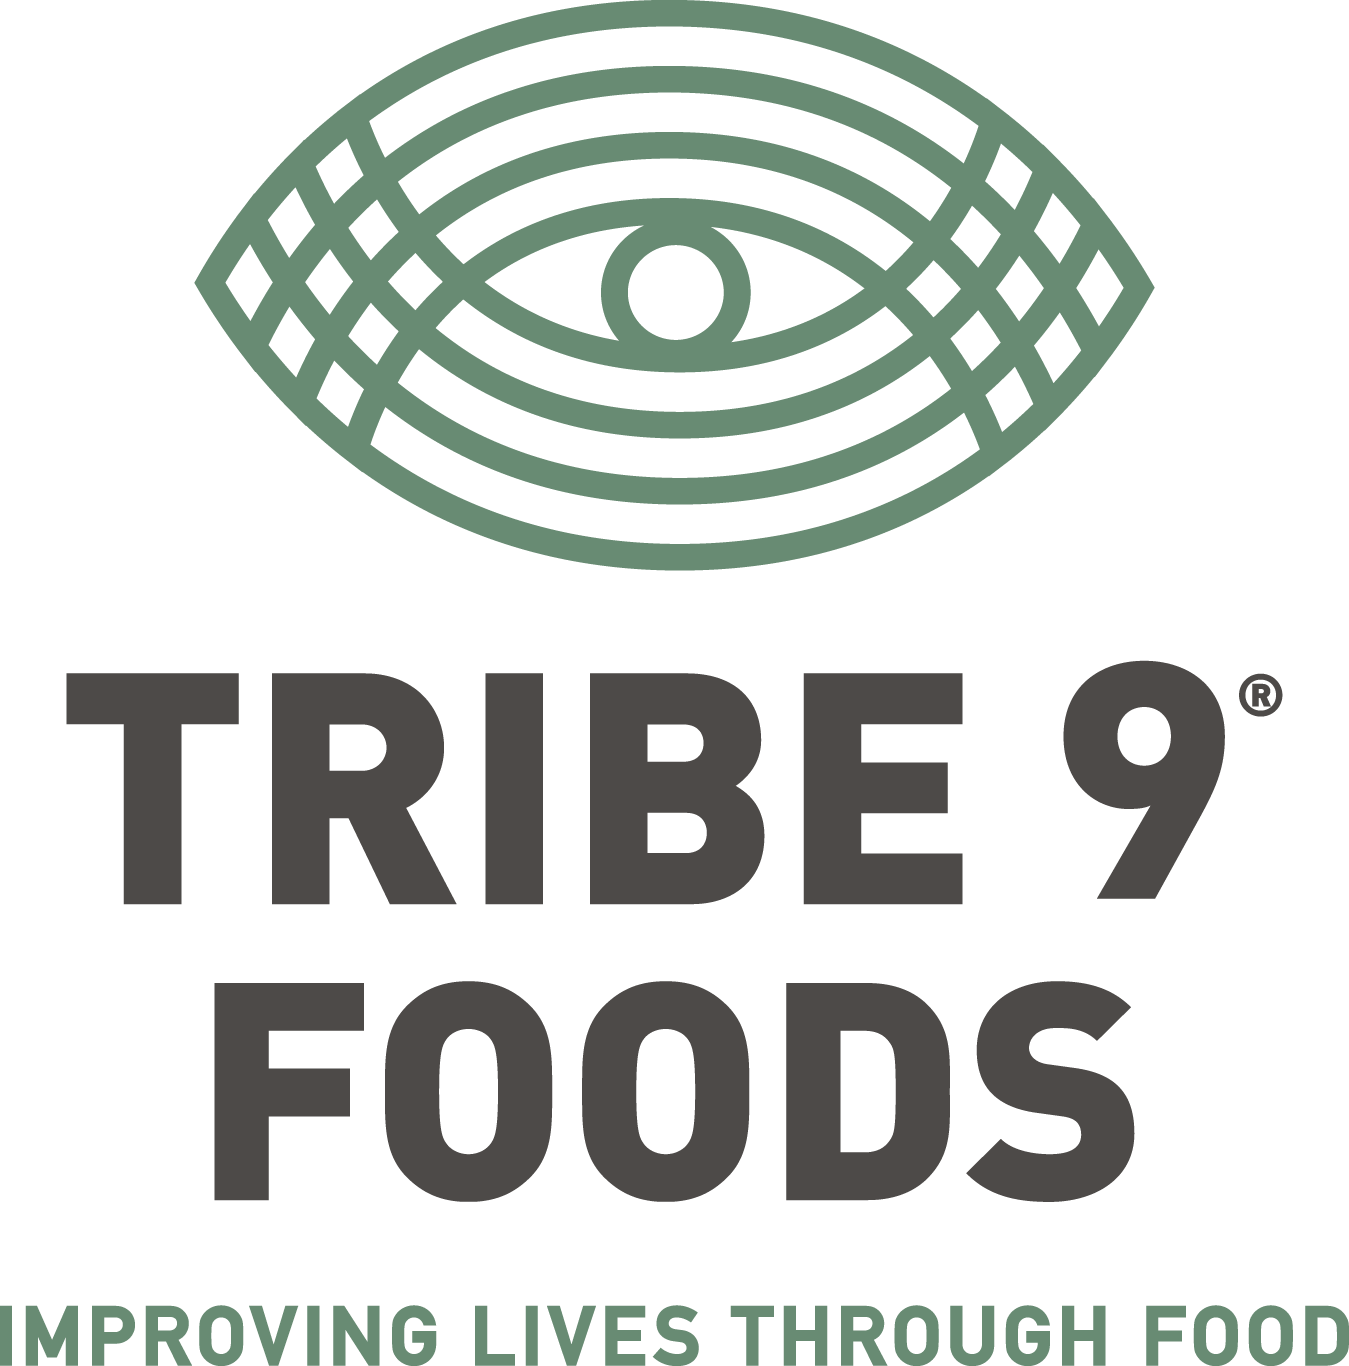 Tribe 9 Foods